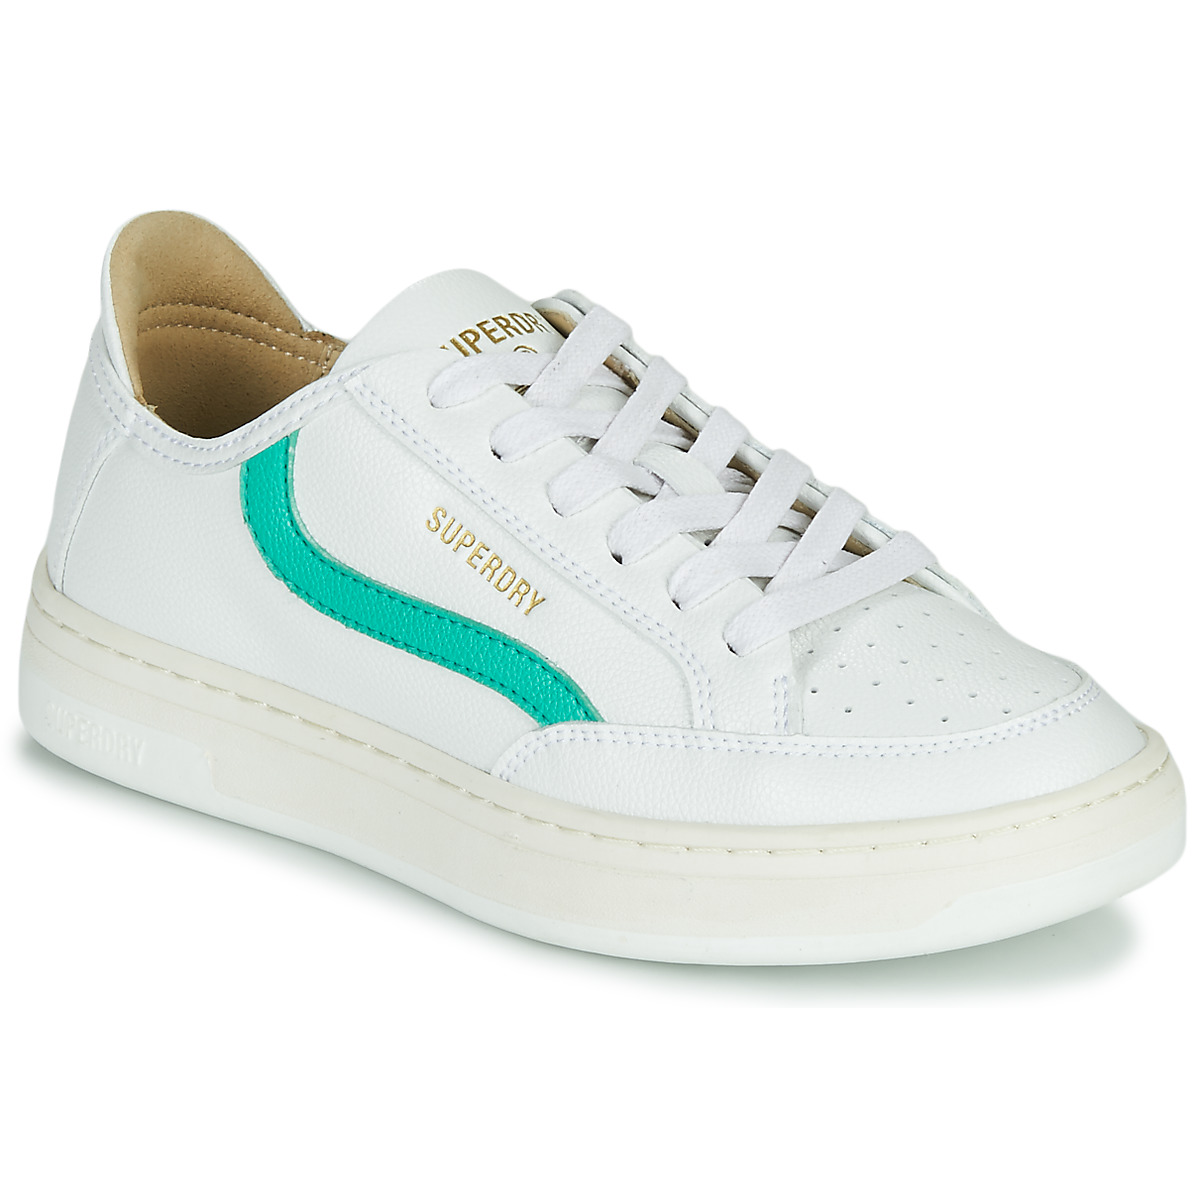 Superdry Basket Lux Low Trainer White